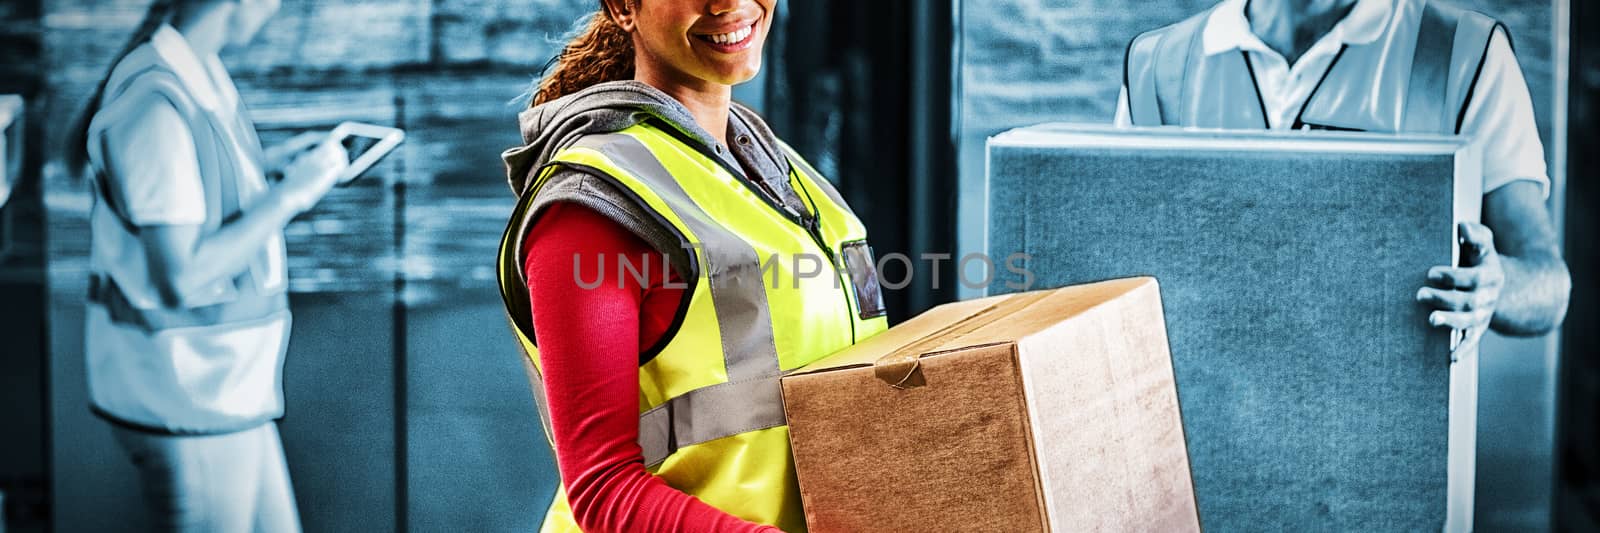 Worker is holding goods and smiling to the camera in a warehouse